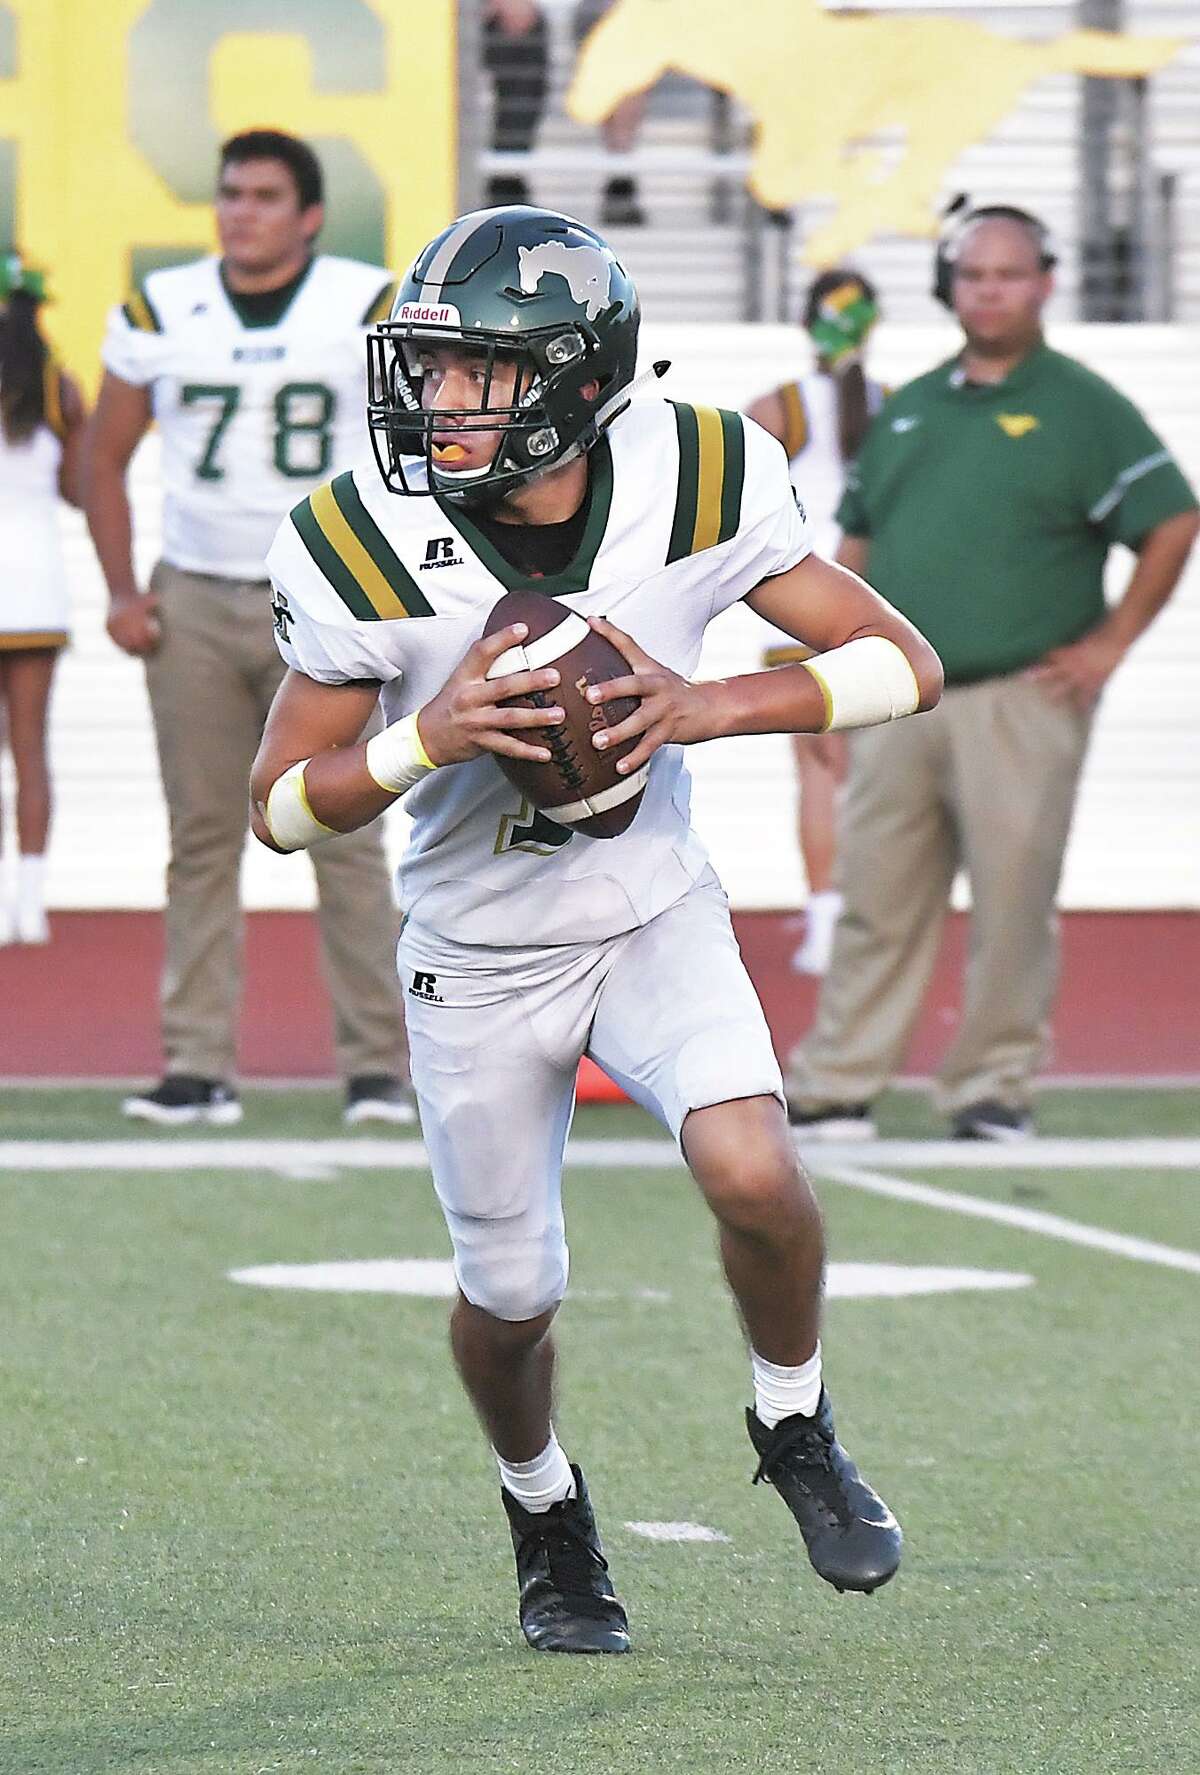 Nixon quarterback Austin Garcia completed three of his four passes for 71 yards and a score in a win over Cigarroa Friday. The junior also rushed for 81 yards and two touchdowns.